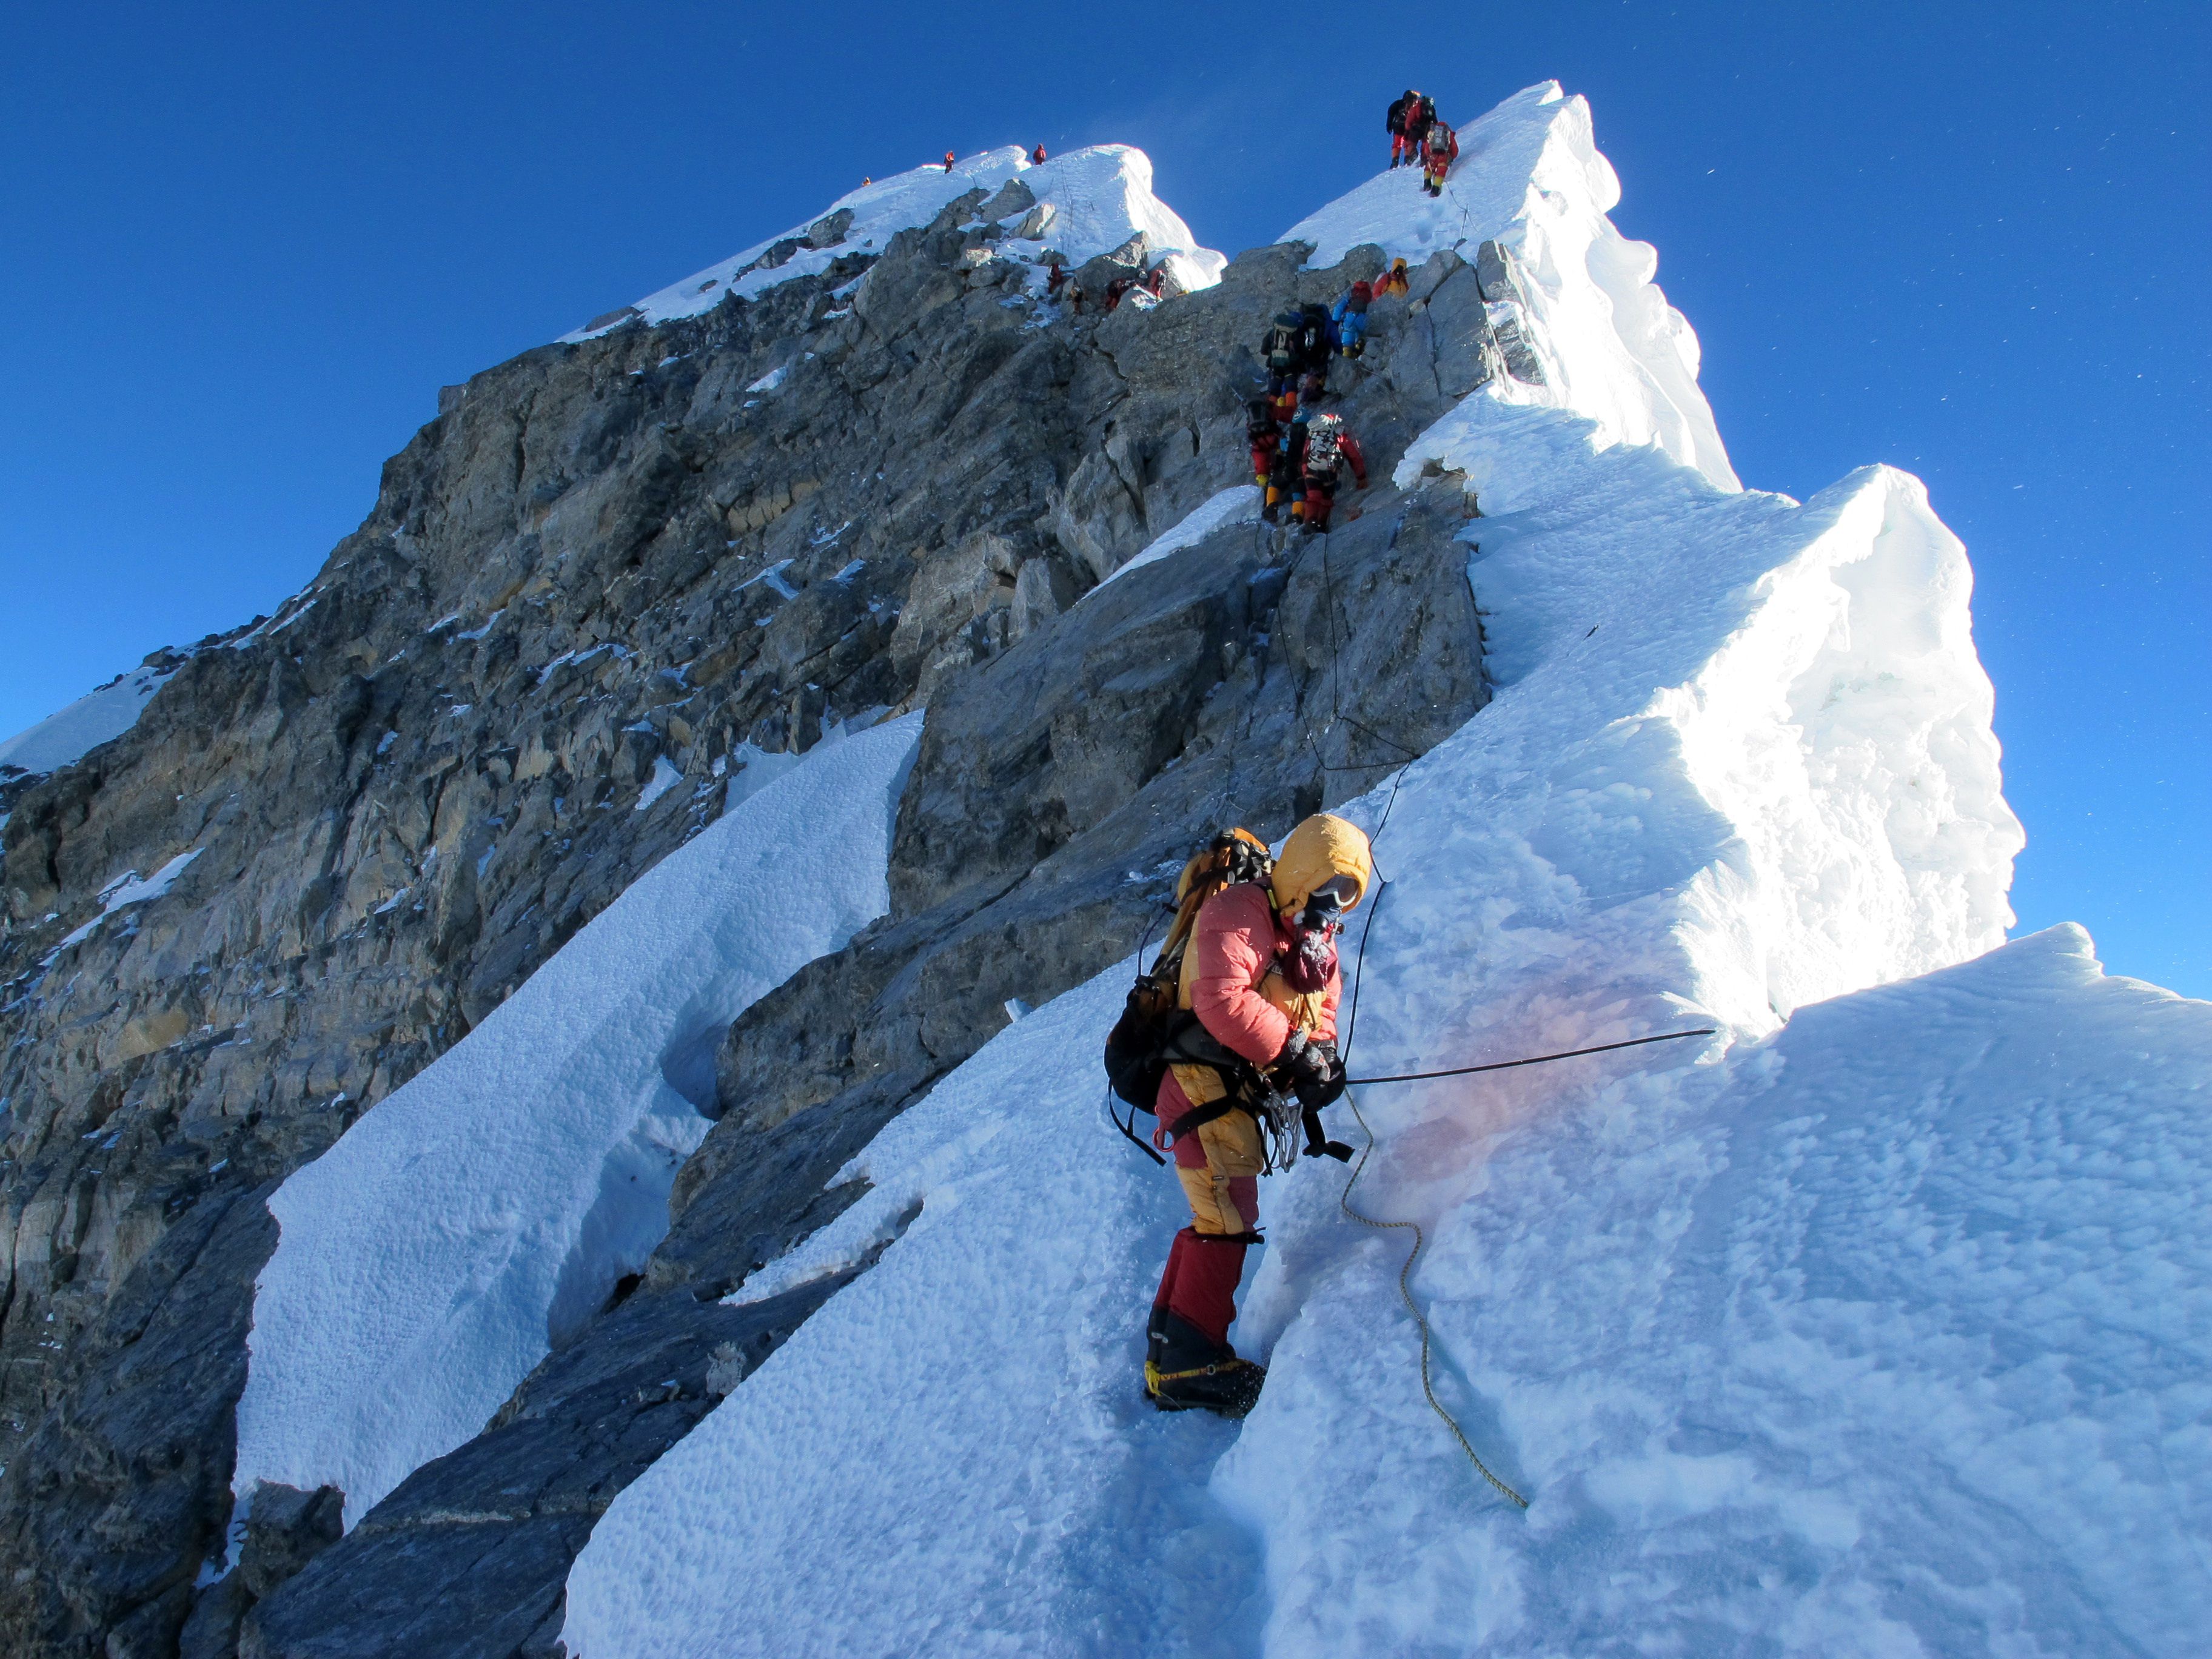 Mount Everest is shrinking: India to send expedition to see if famed ...